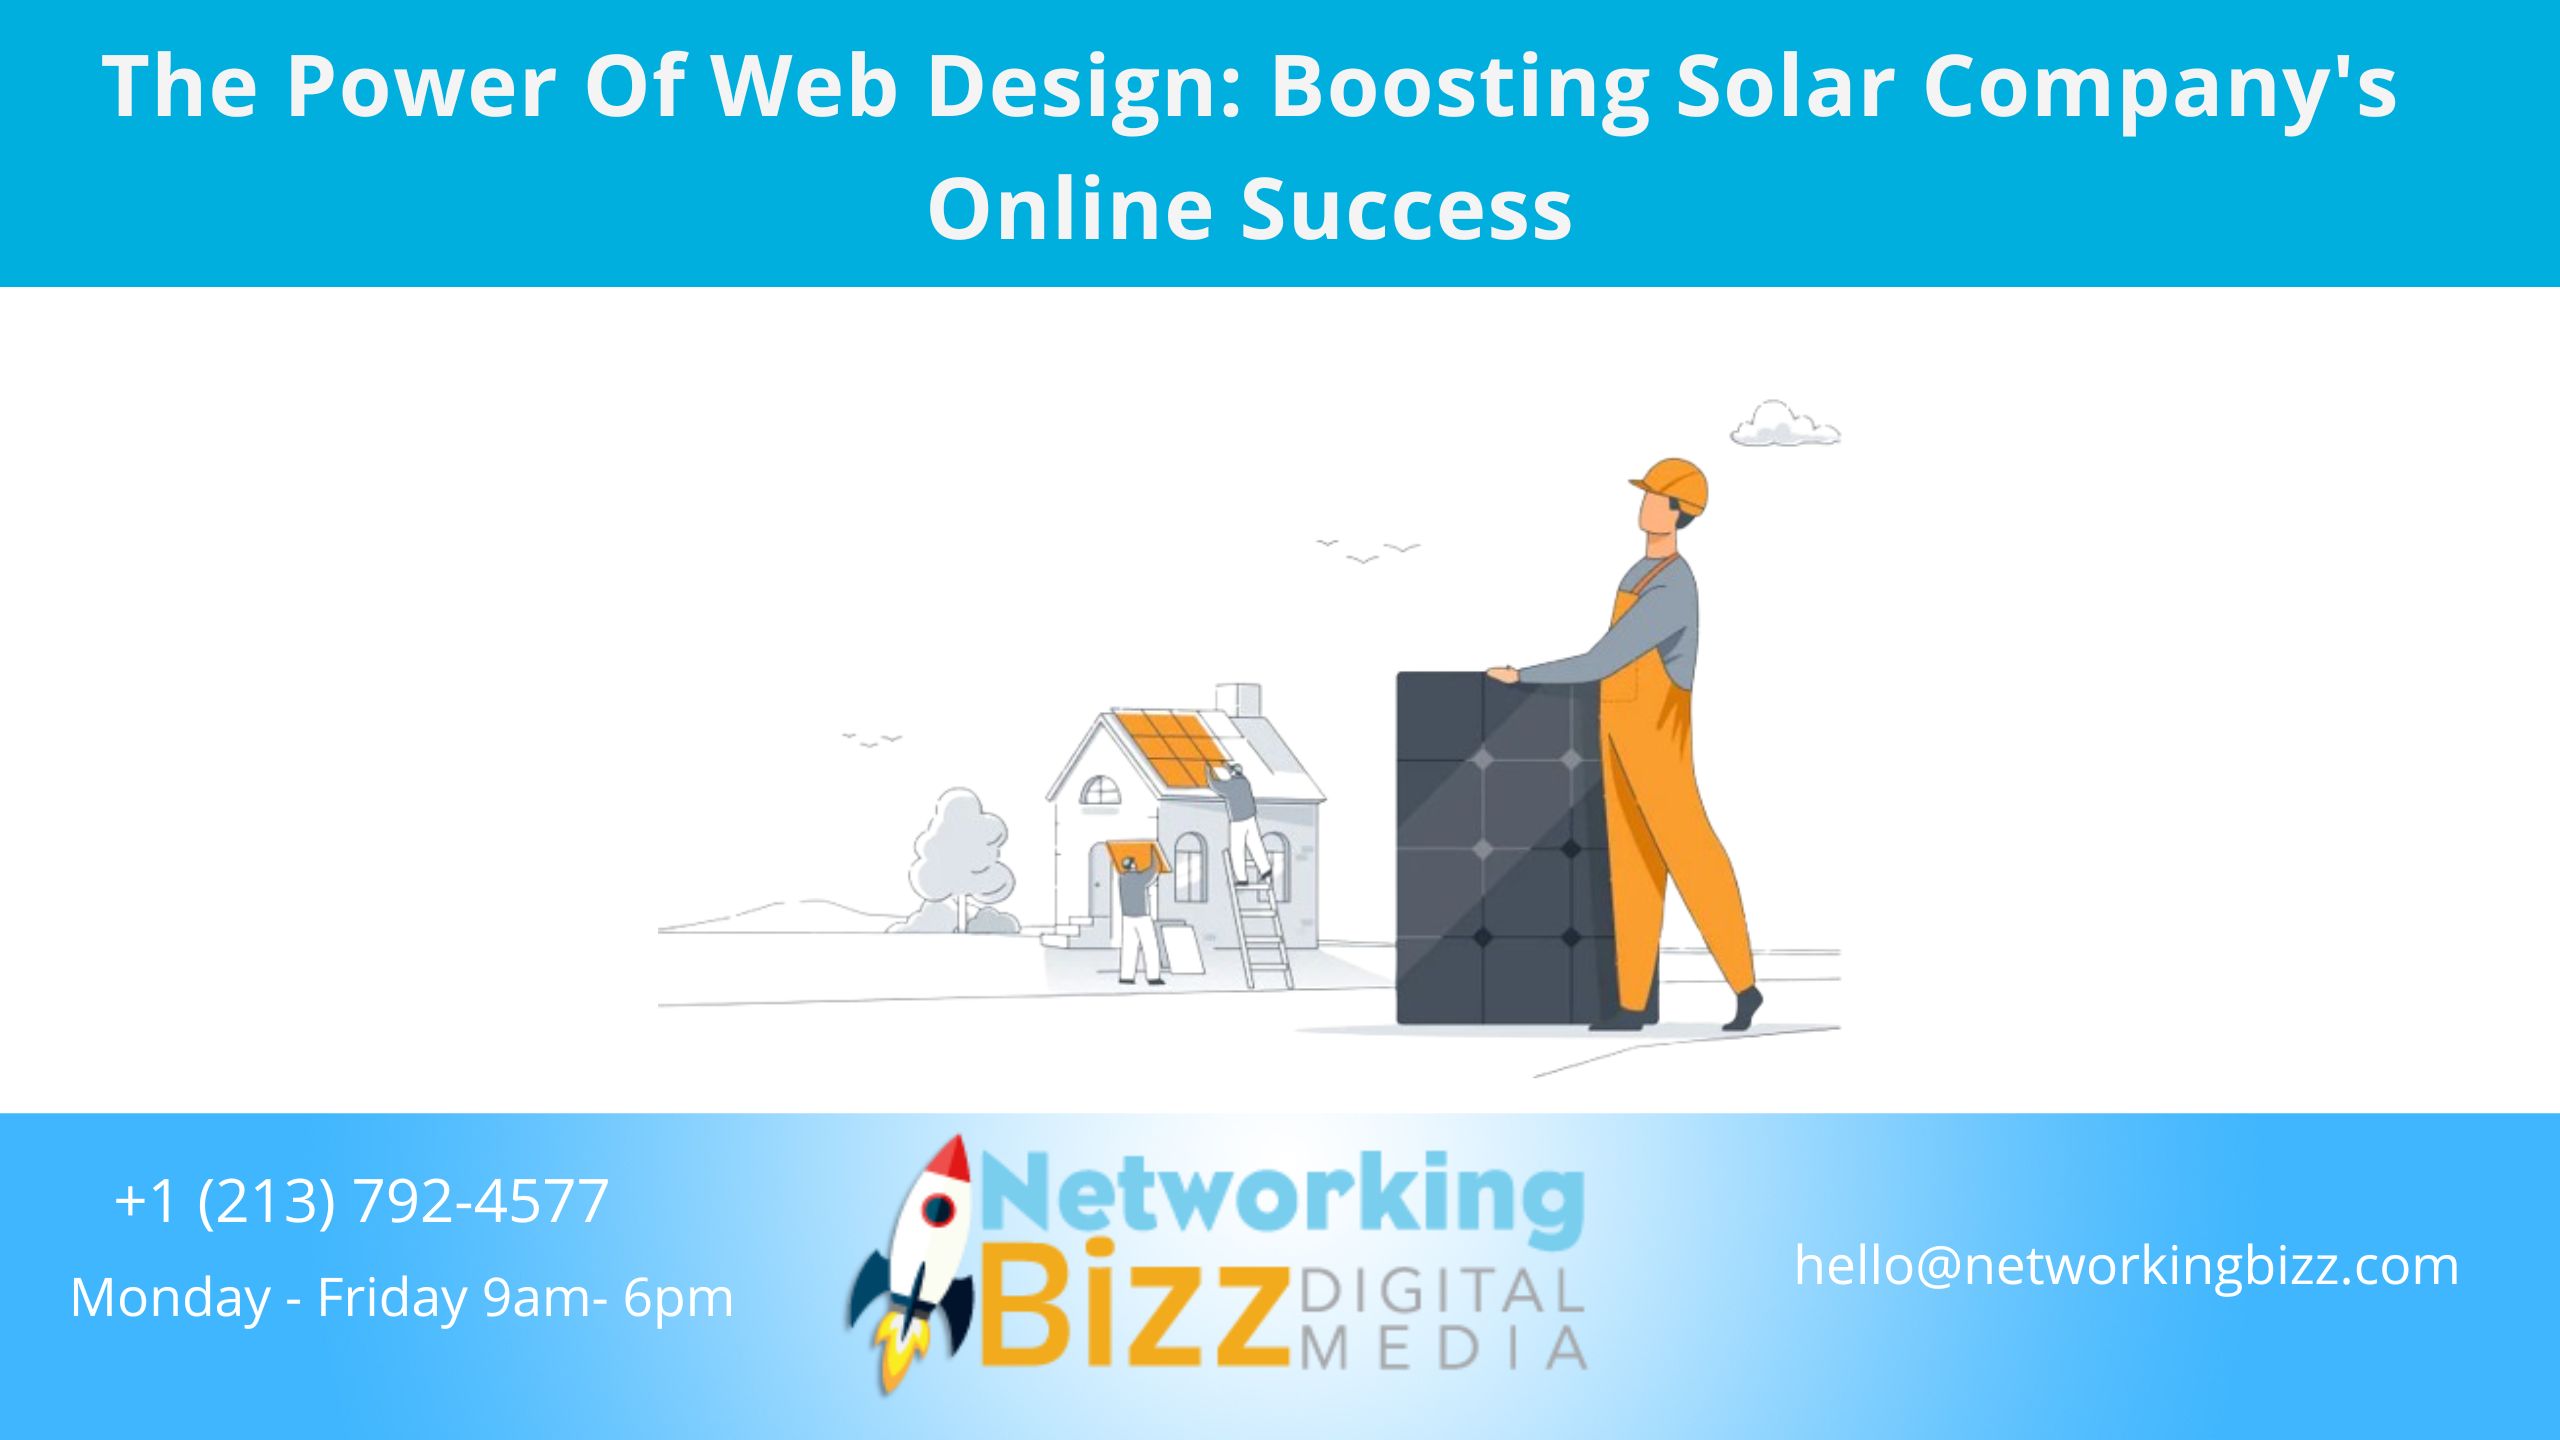 The Power Of Web Design: Boosting Solar Company’s Online Success